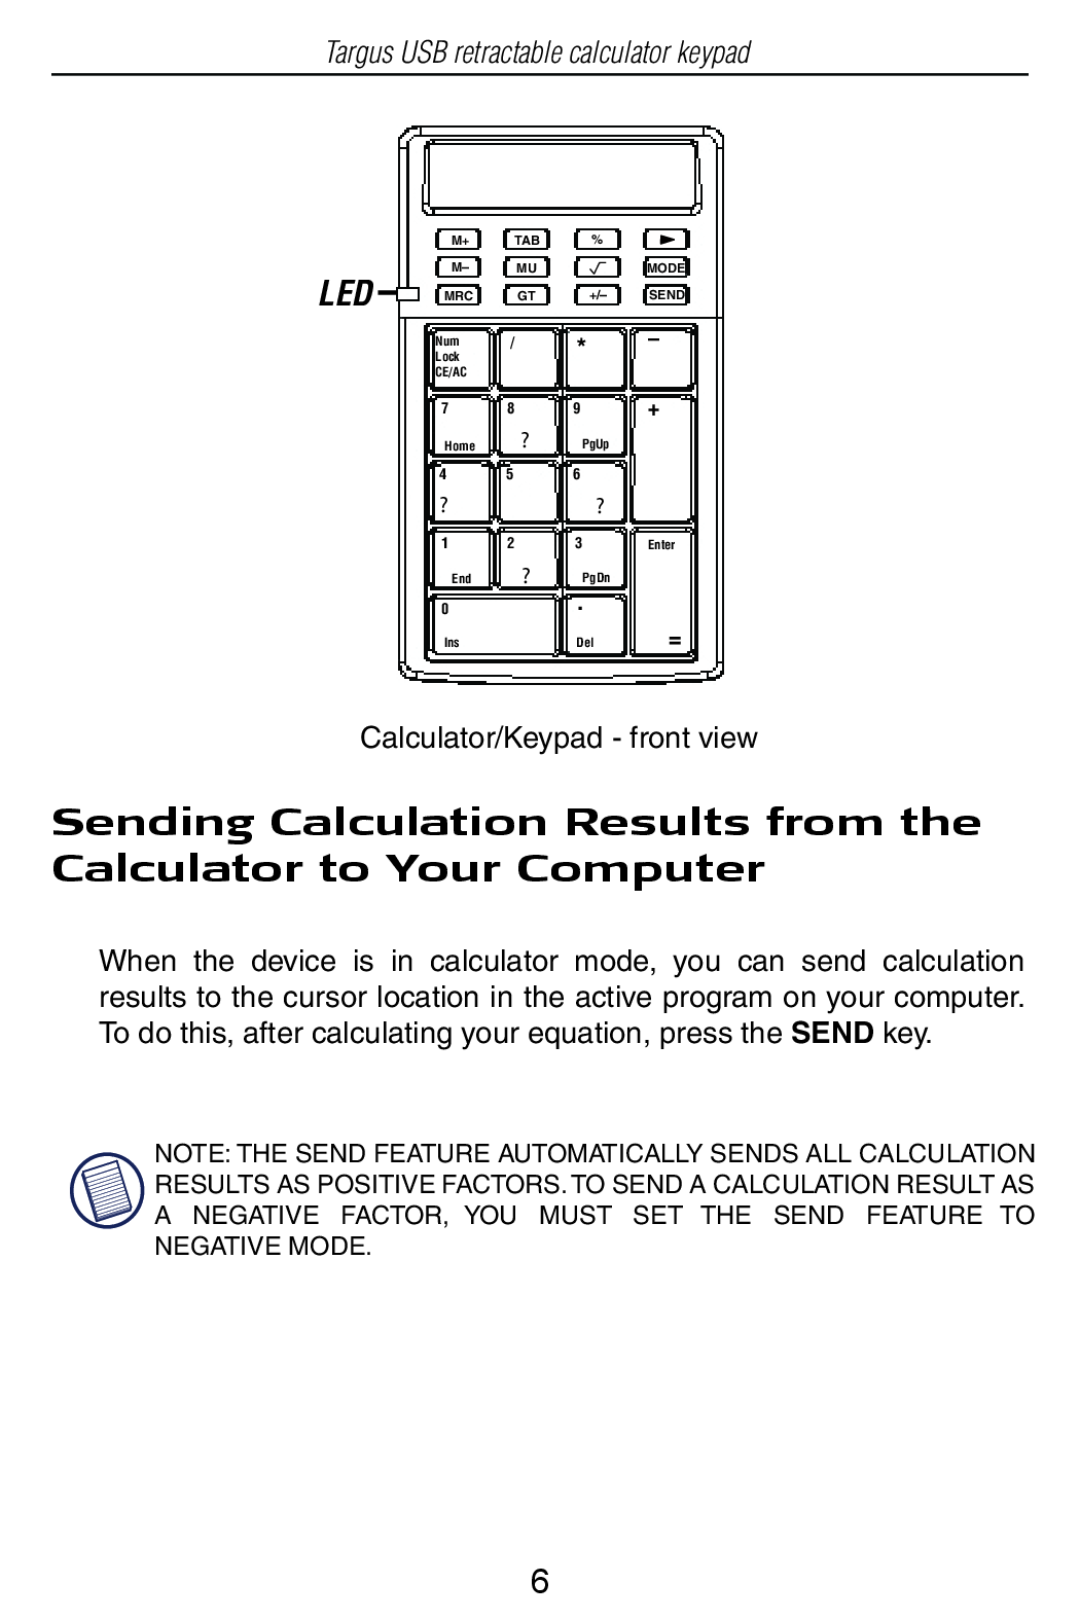 Targus USB Retractable Calculator Keypad specifications Sending Calculation Results from the Calculator to Your Computer 